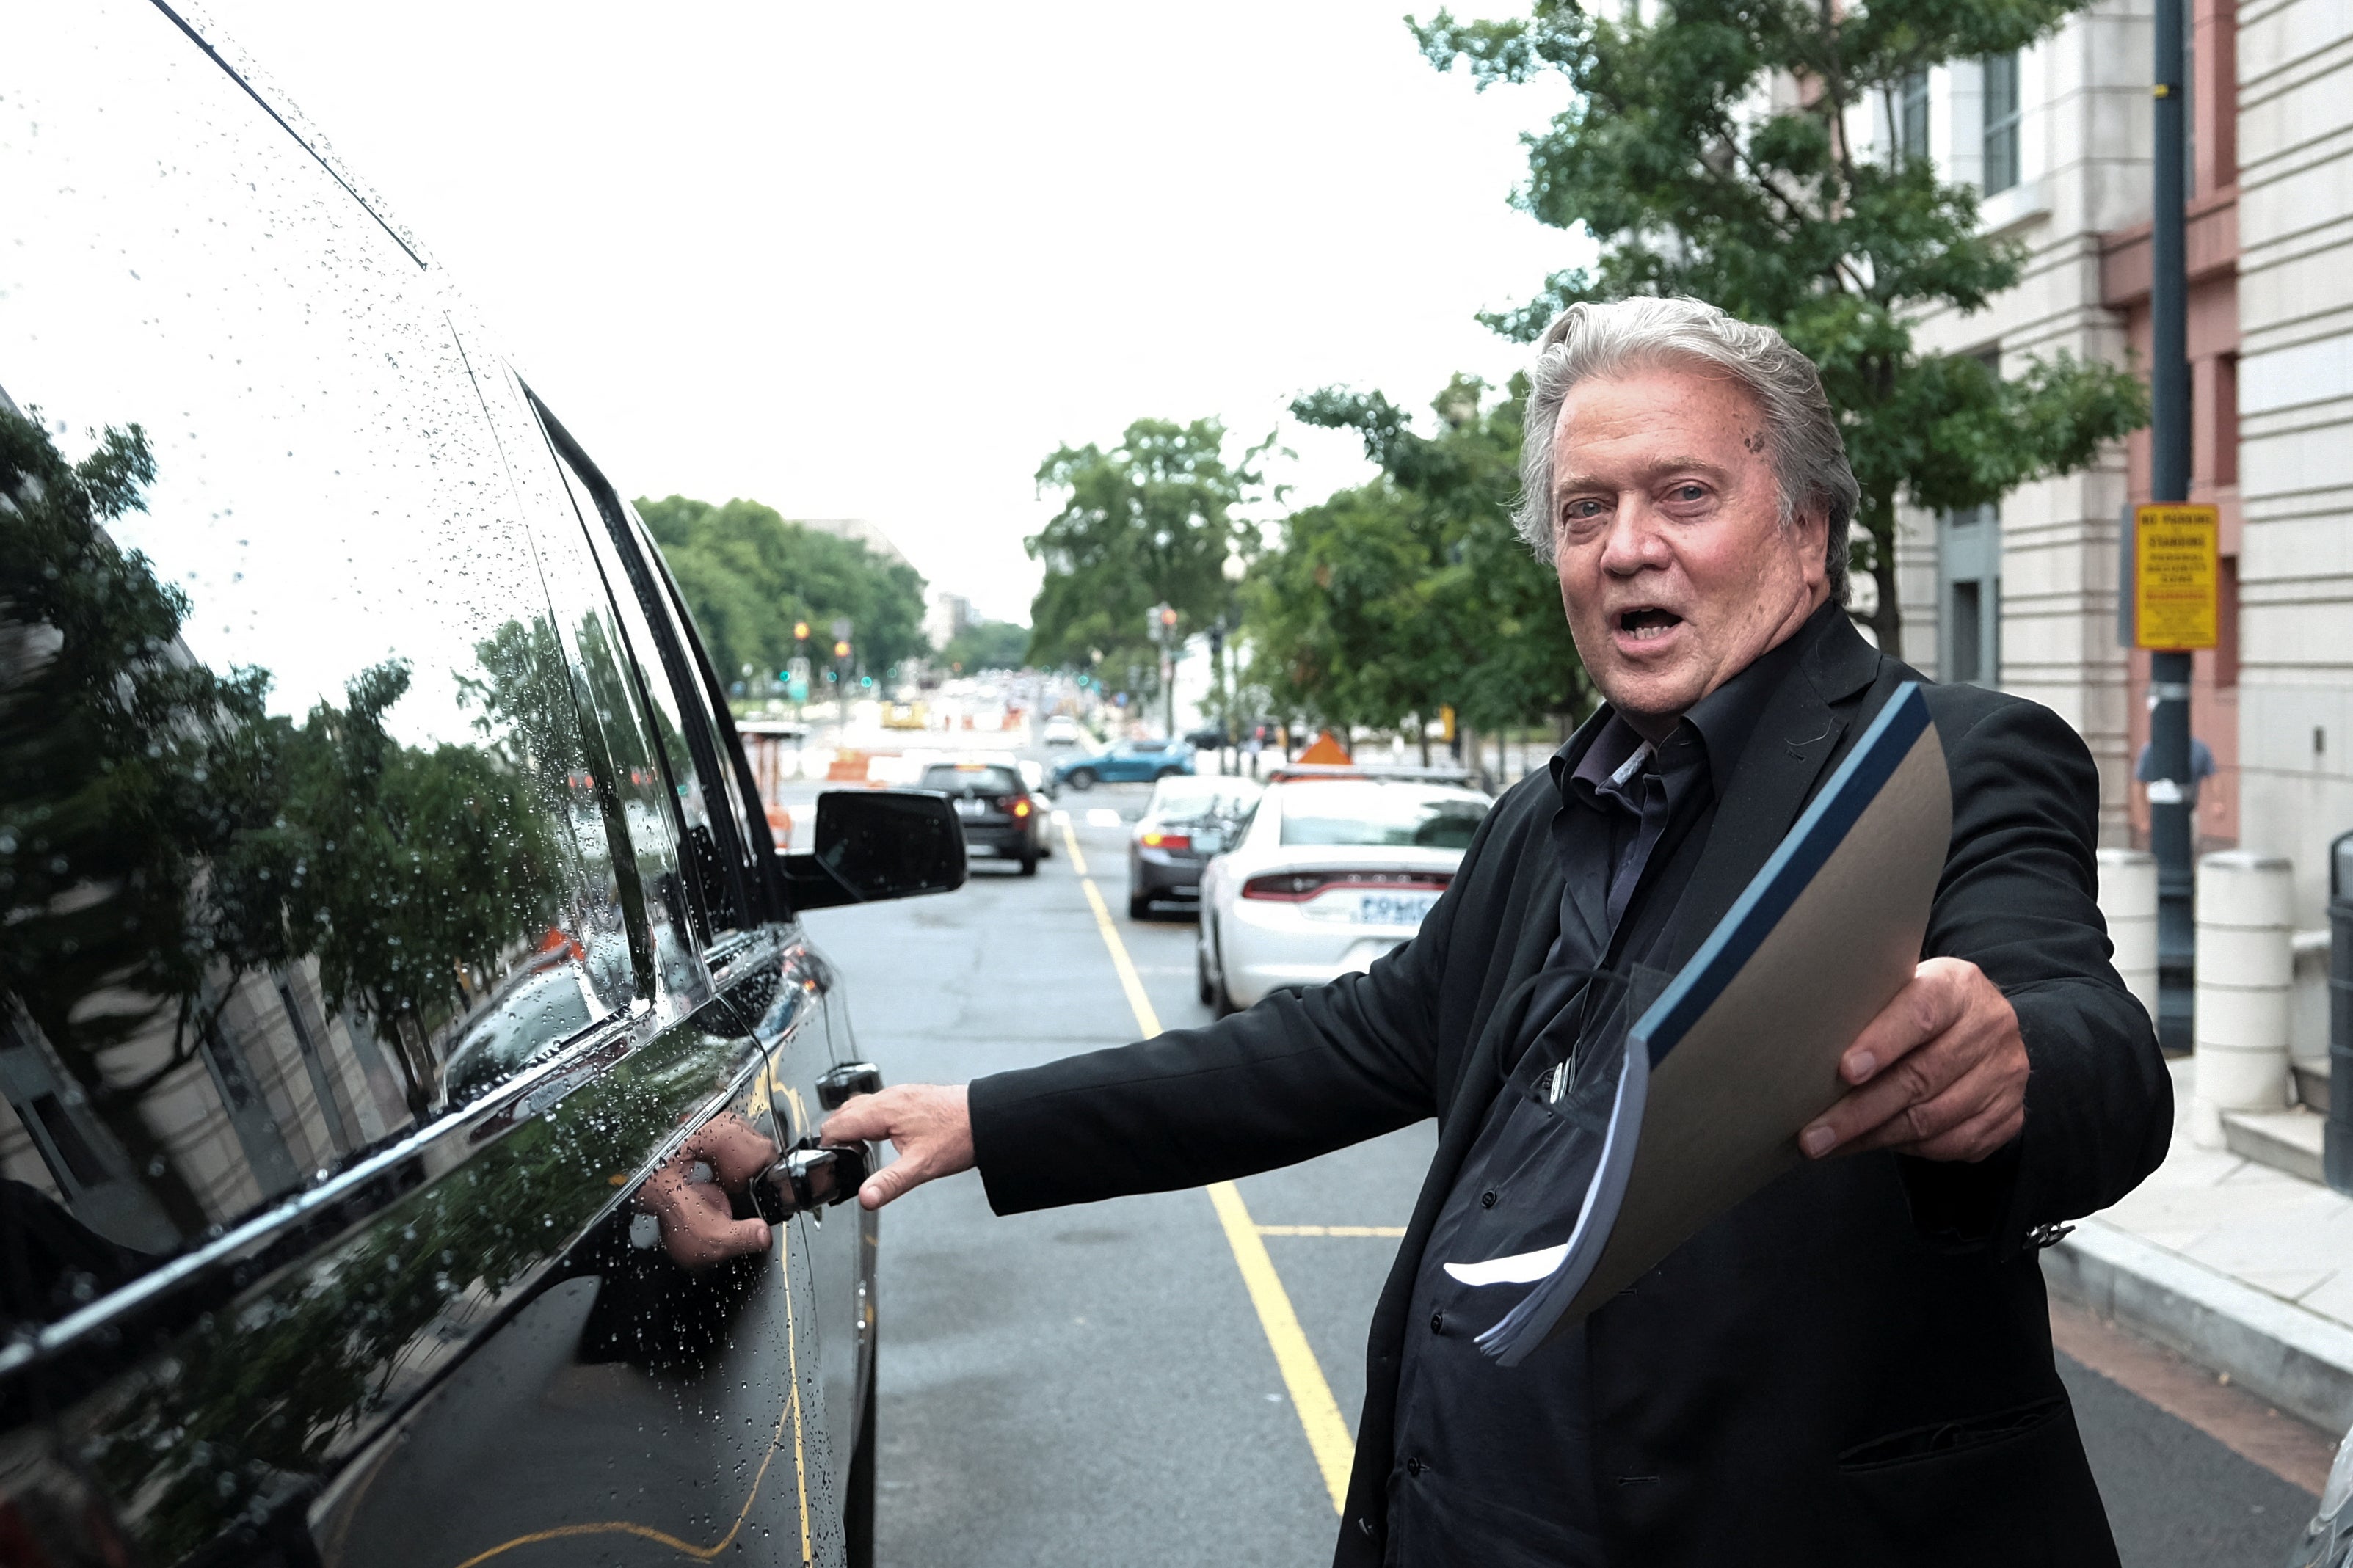 Former Trump White House strategist Steve Bannon opens the door of a car and departs, following the first day of his trial in Washington, D.C.